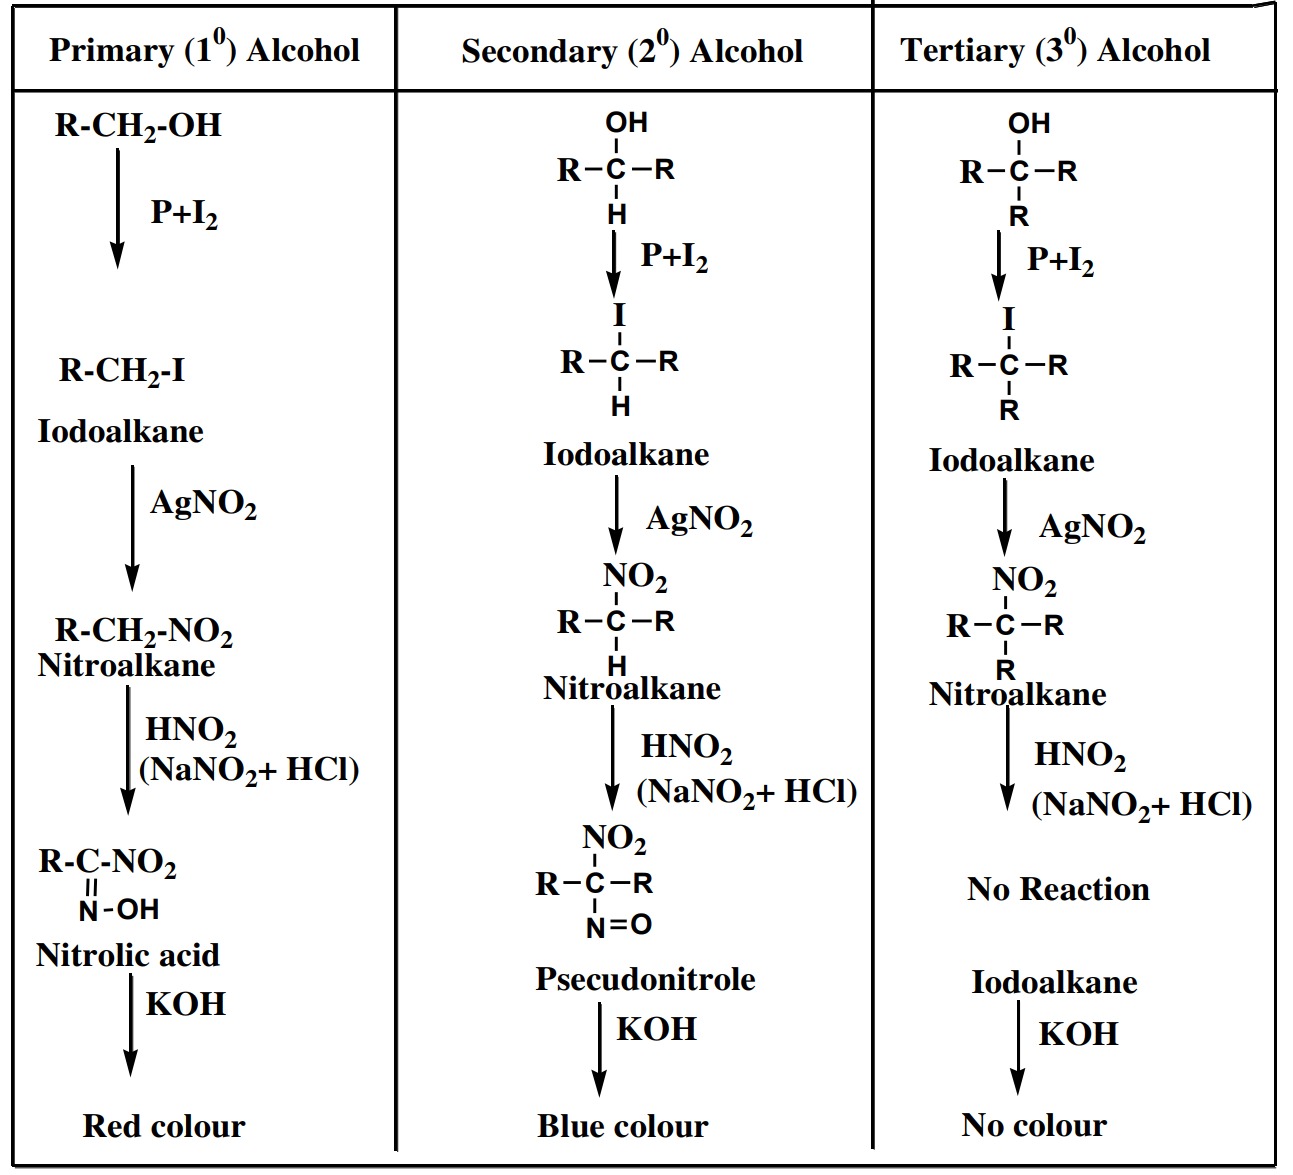 Victor Meyer’s Method - Table for distinguishing 1°, 2° and 3° alcohols